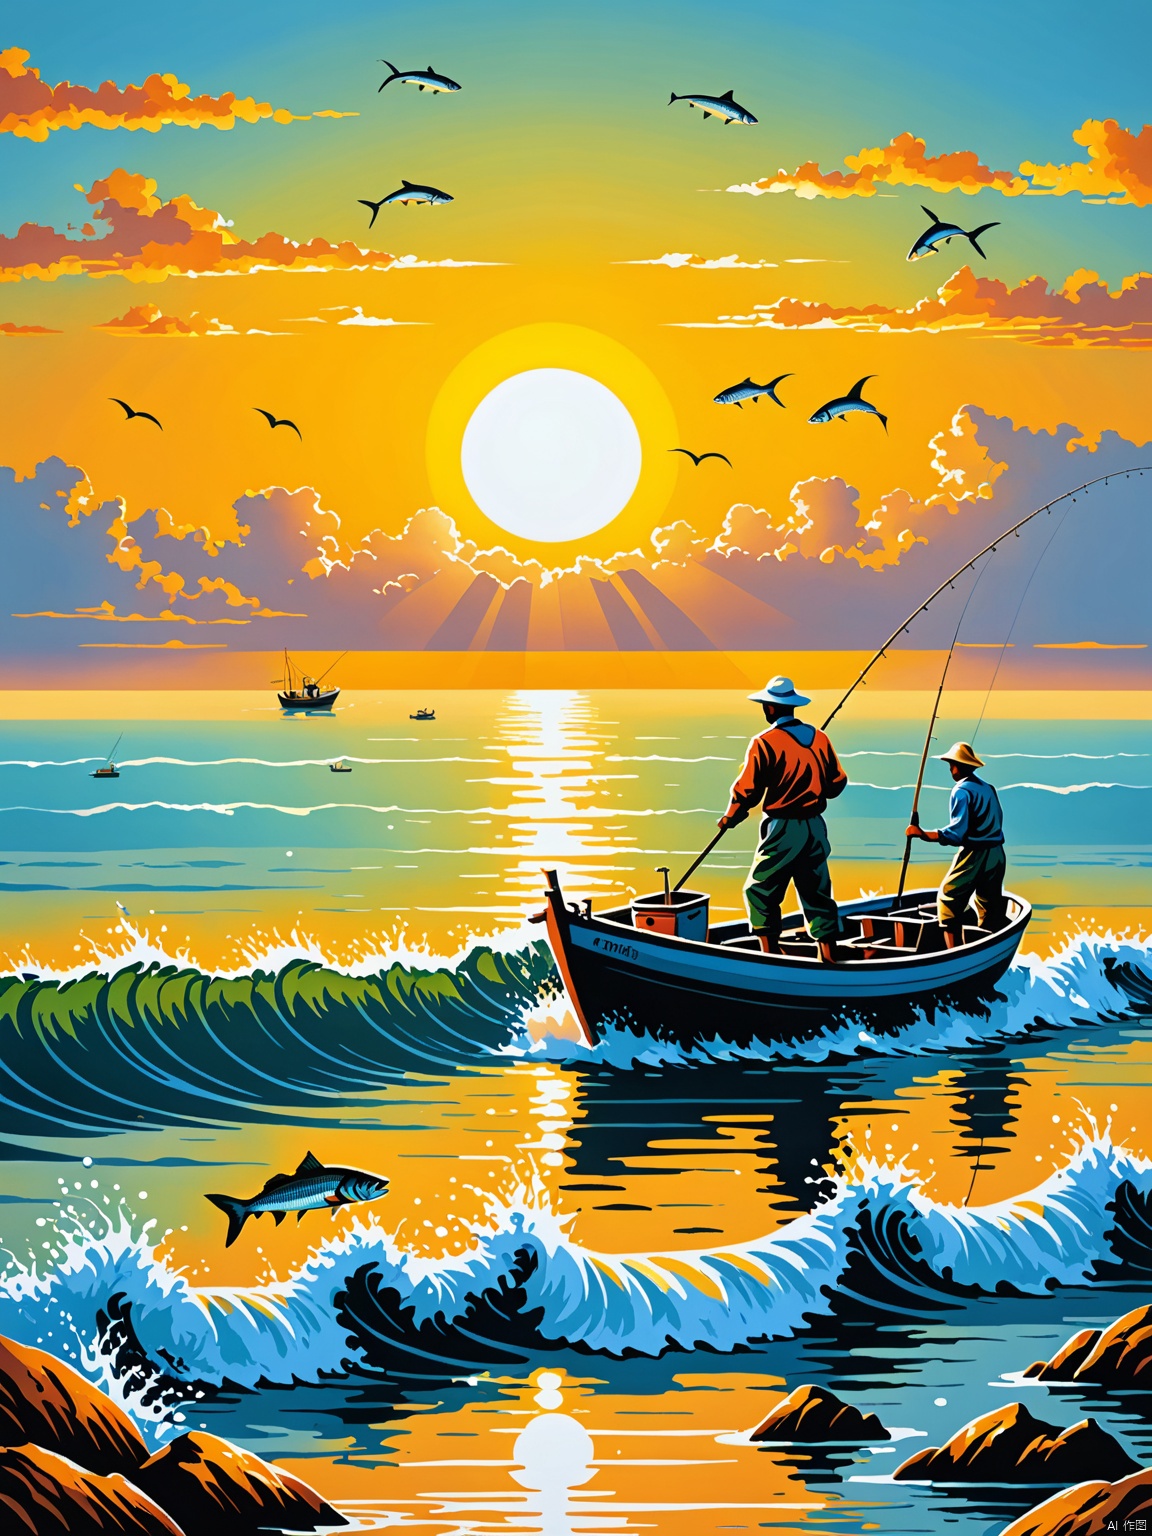  best quality, farmer painting, fisherman fishing, fishing boat, ocean background, jumping big fish, sun at sea level, very aesthetic